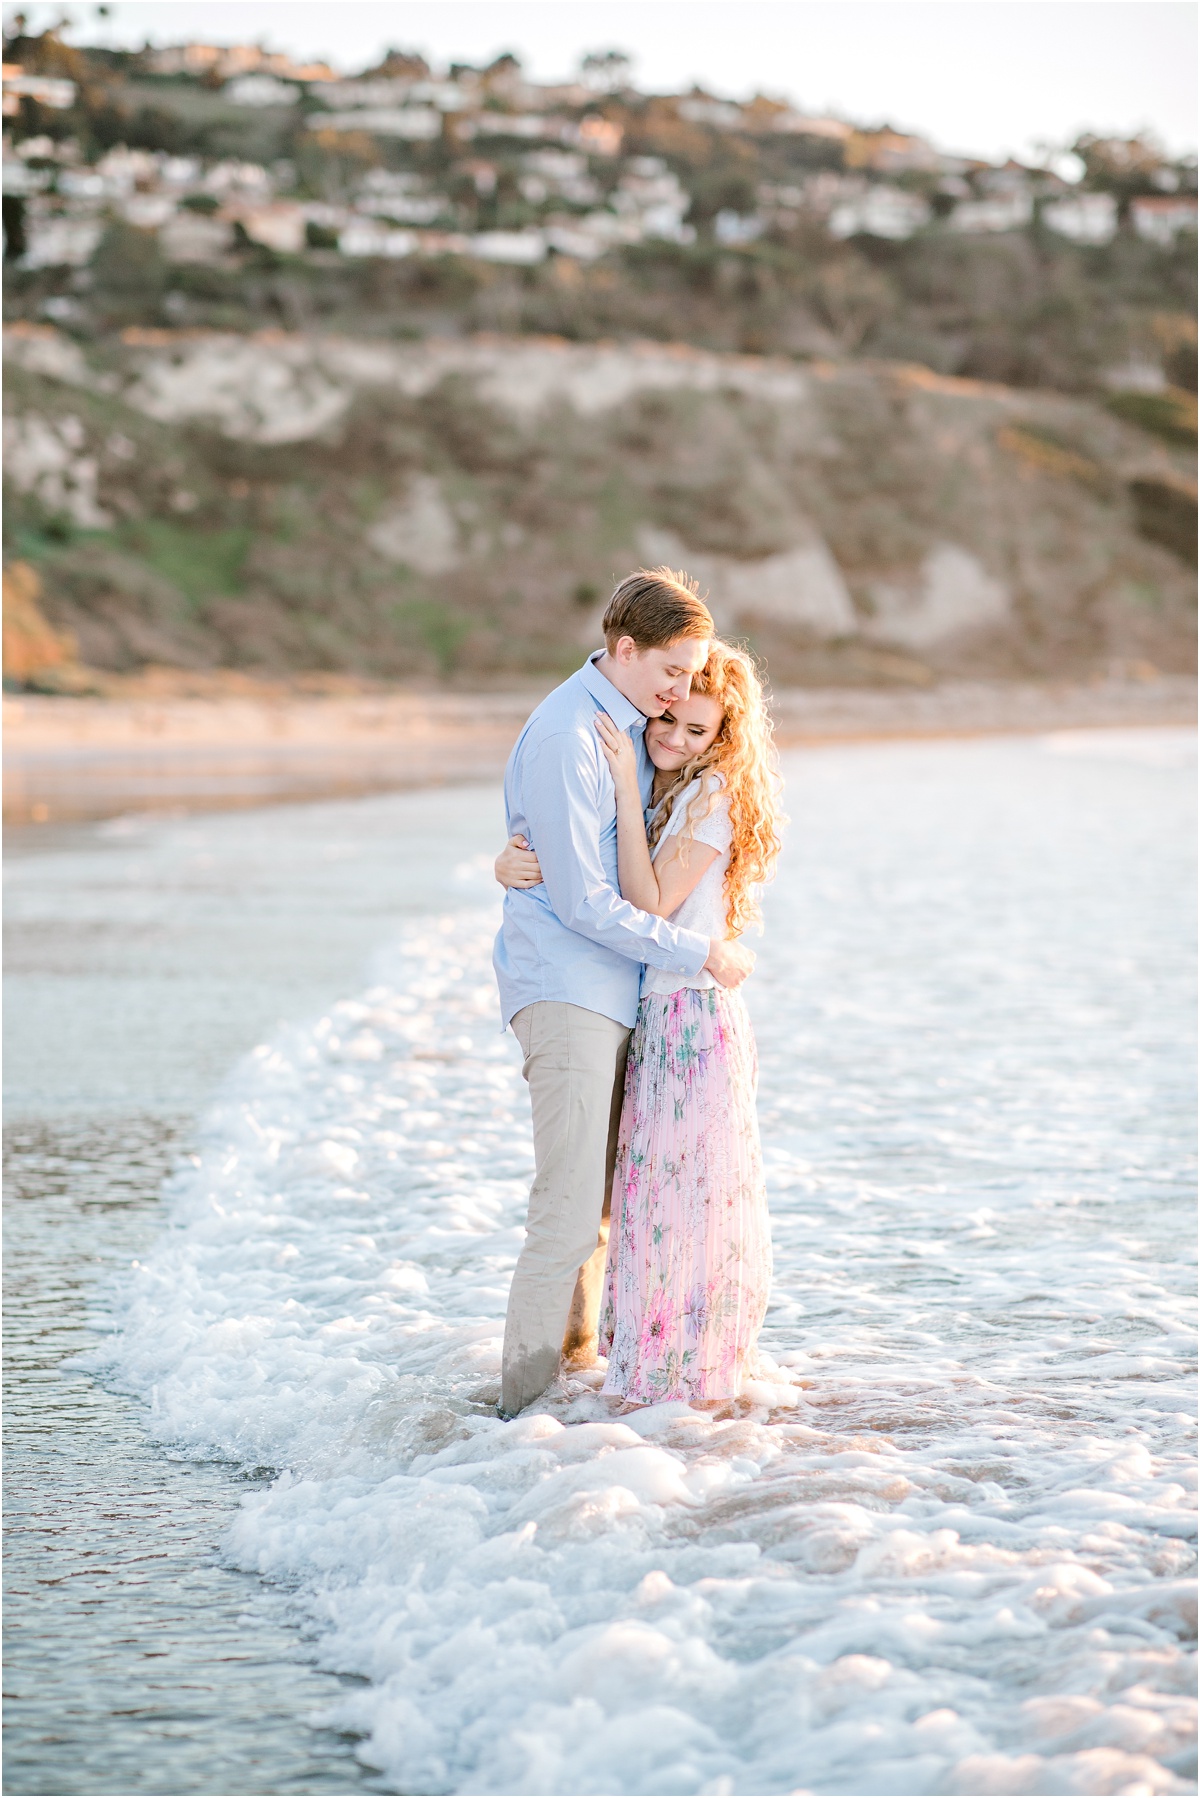 Palos Verdes Engagement Photography // Stacee Lianna Photography